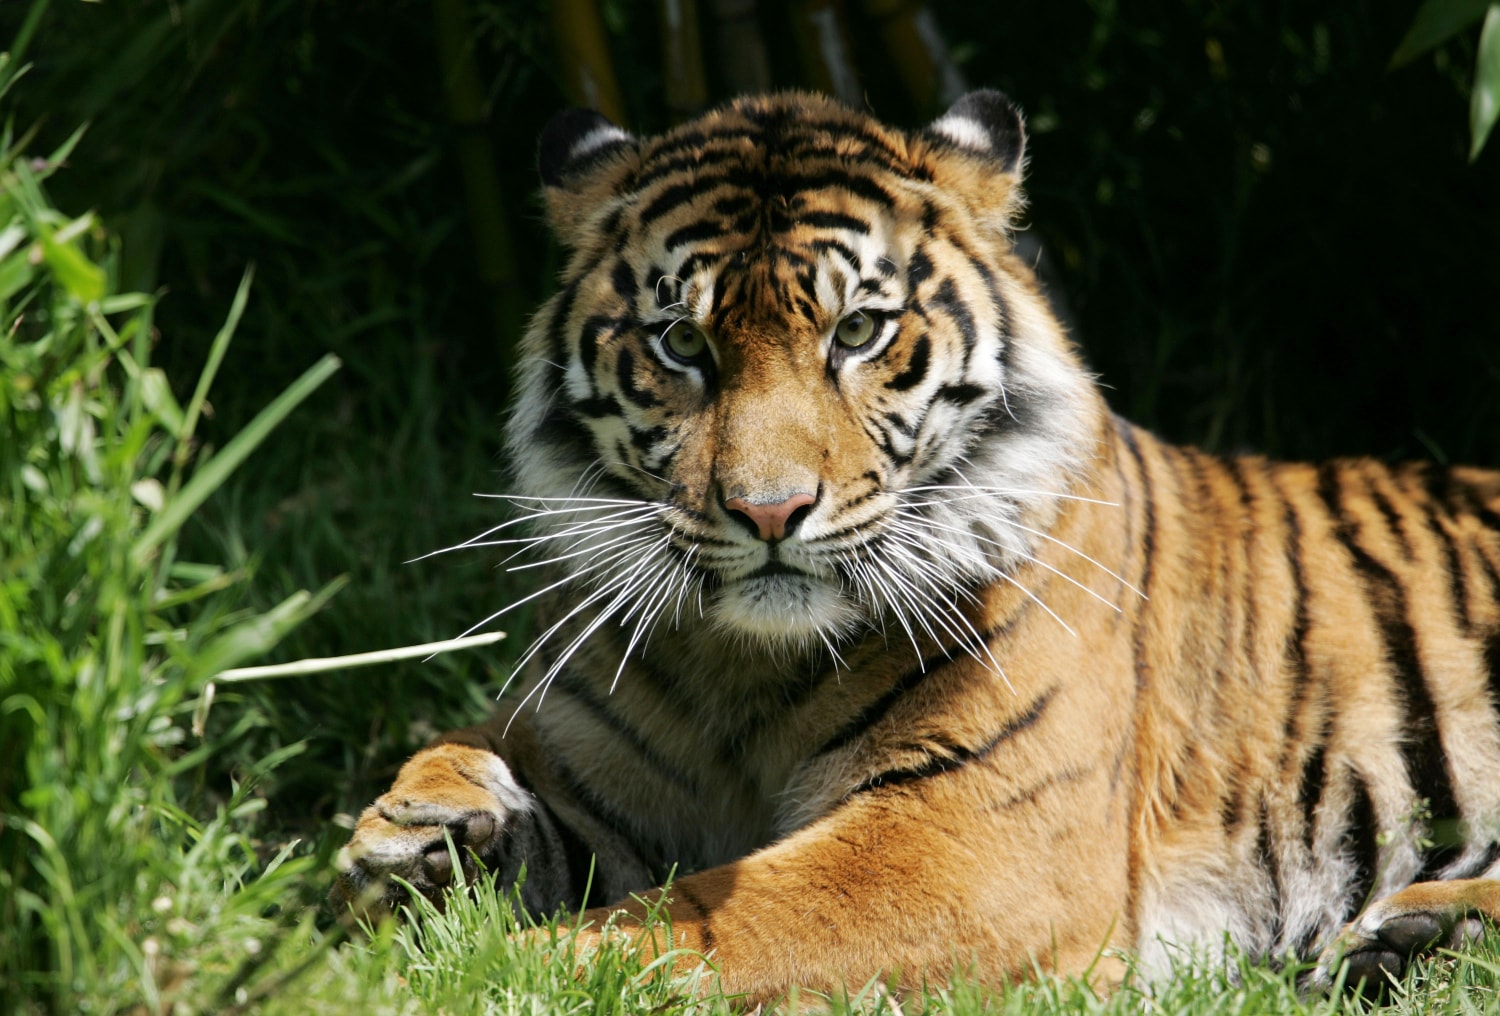 14-year-old tiger at Columbus, Ohio, zoo dies after contracting Covid